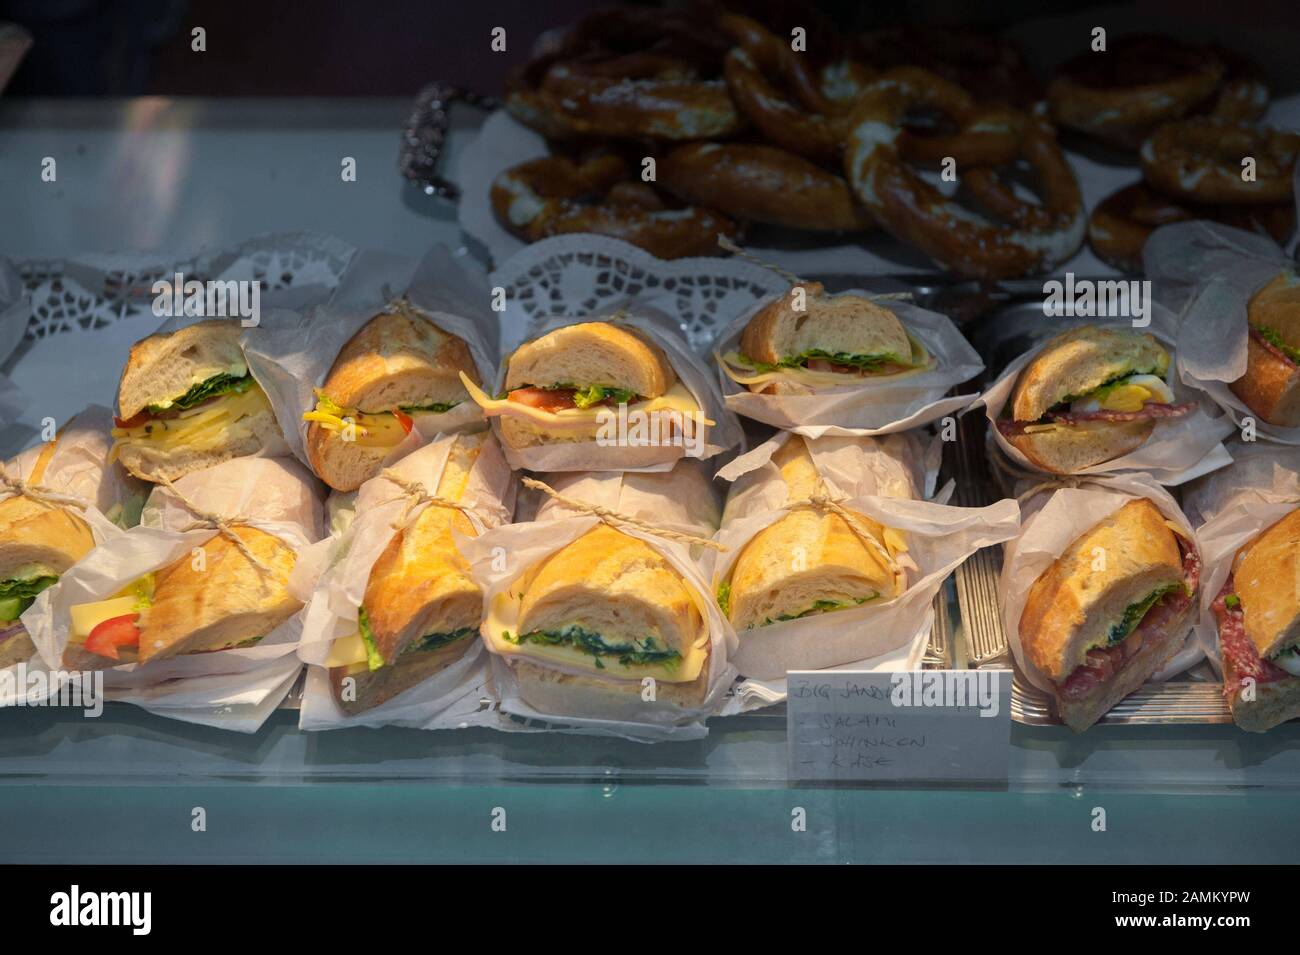 The city's second round-the-clock kiosk has opened at Münchner Freiheit. The assortment also includes filled baguettes. [automated translation] Stock Photo